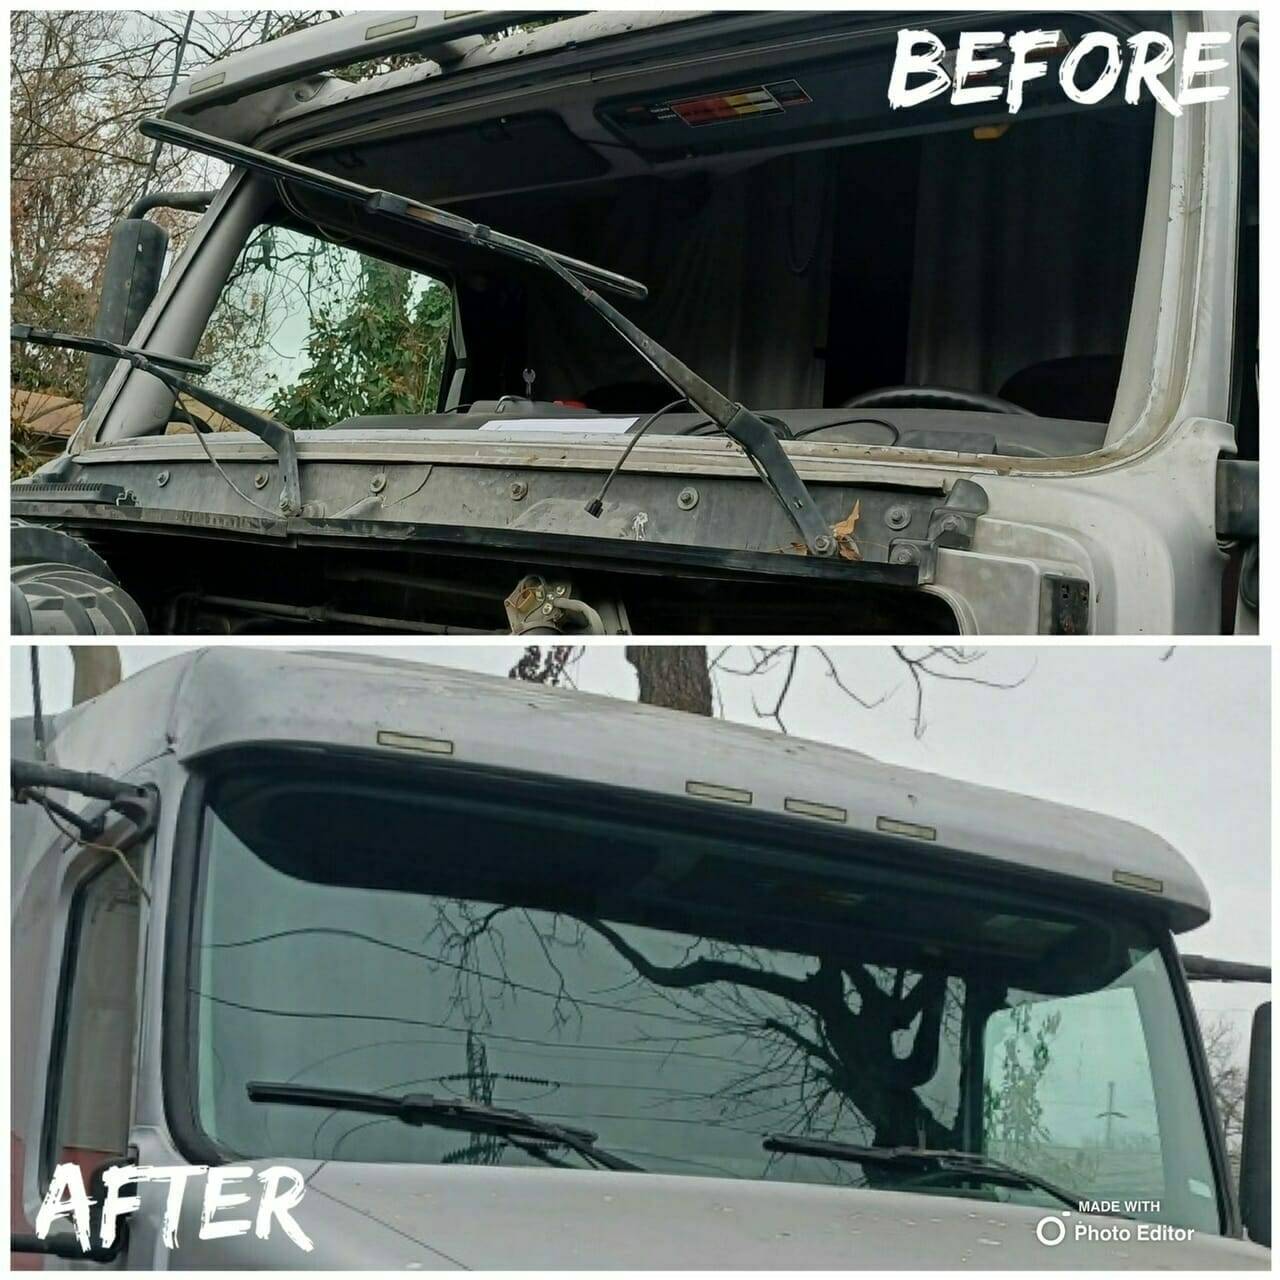 A compelling before-and-after snapshot showing the transformation of a severely damaged windshield on a 2014 Kentworth T680 in Leon Valley, Texas. The top half of the picture illustrates the initial state - a one-piece windshield severely cracked from flying road debris during transit. In contrast, the bottom half displays the new, unblemished windshield post-replacement. This illustrates our skilled and prompt commercial auto glass replacement service, fulfilling our commitment to ensure safety and restore visibility for commercial drivers with our on-site appointments.